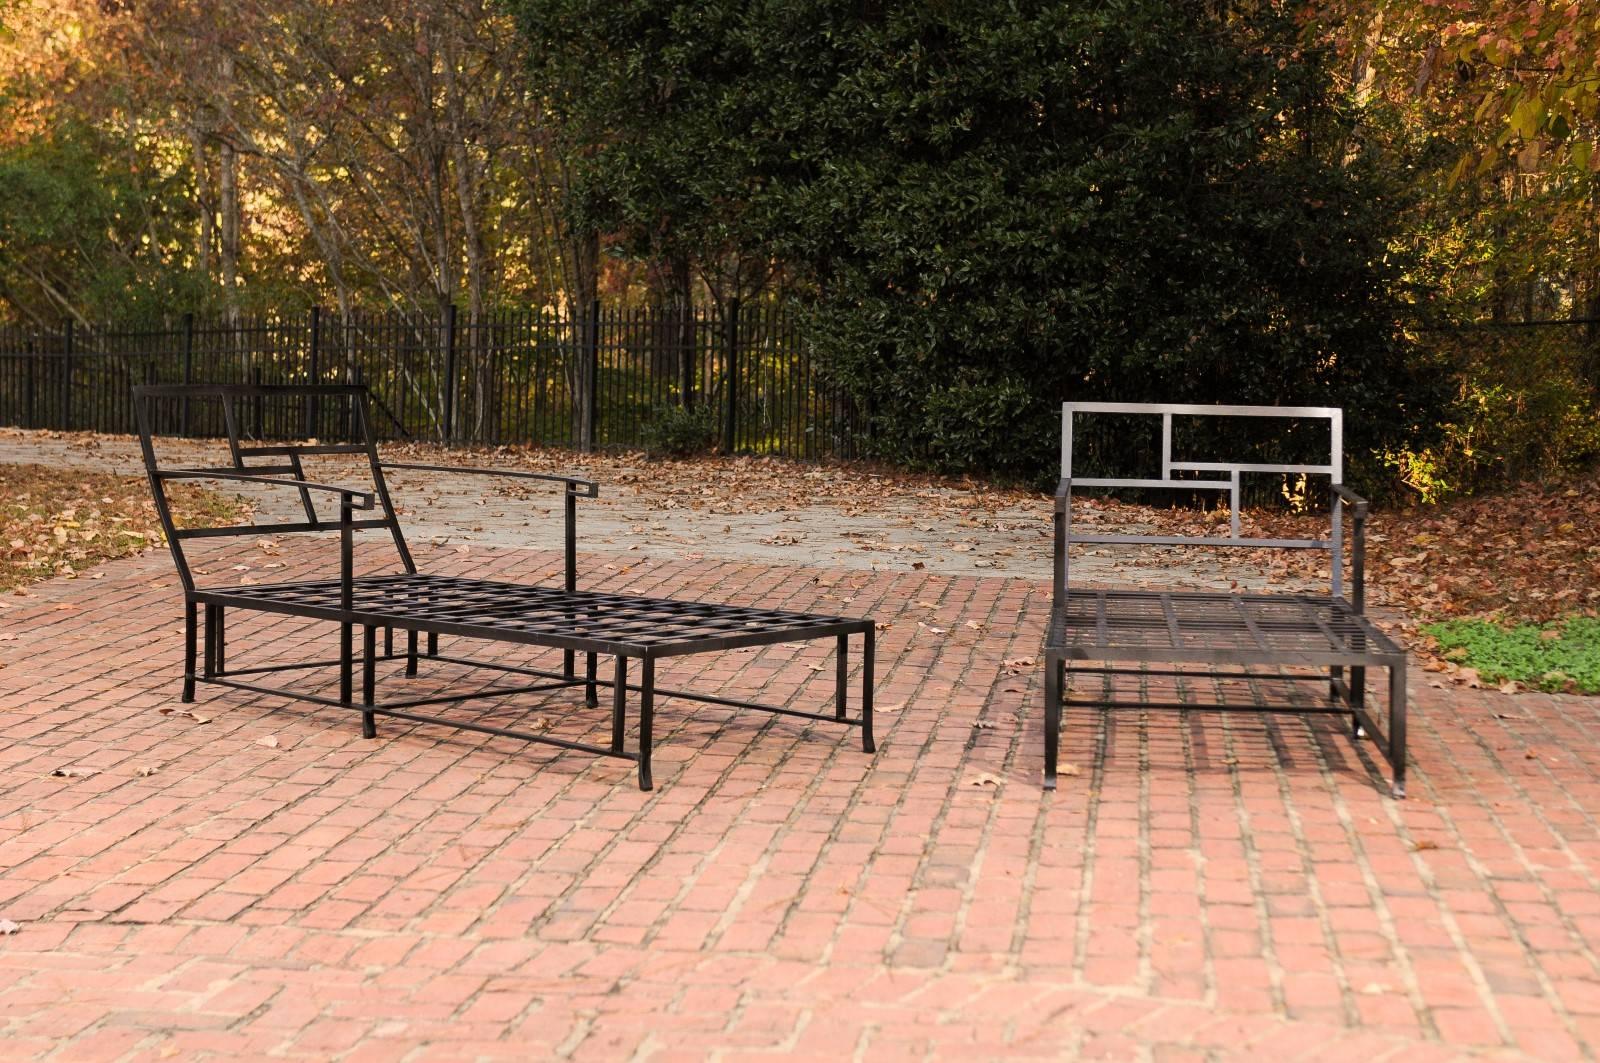 A fabulous pair of wrought iron chaise lounges, circa 1965. Heavy, exceptionally made pieces designed with stunning back and arm details. While suitable for exterior use, these particular chairs have always resided indoors. Stylish pieces made to